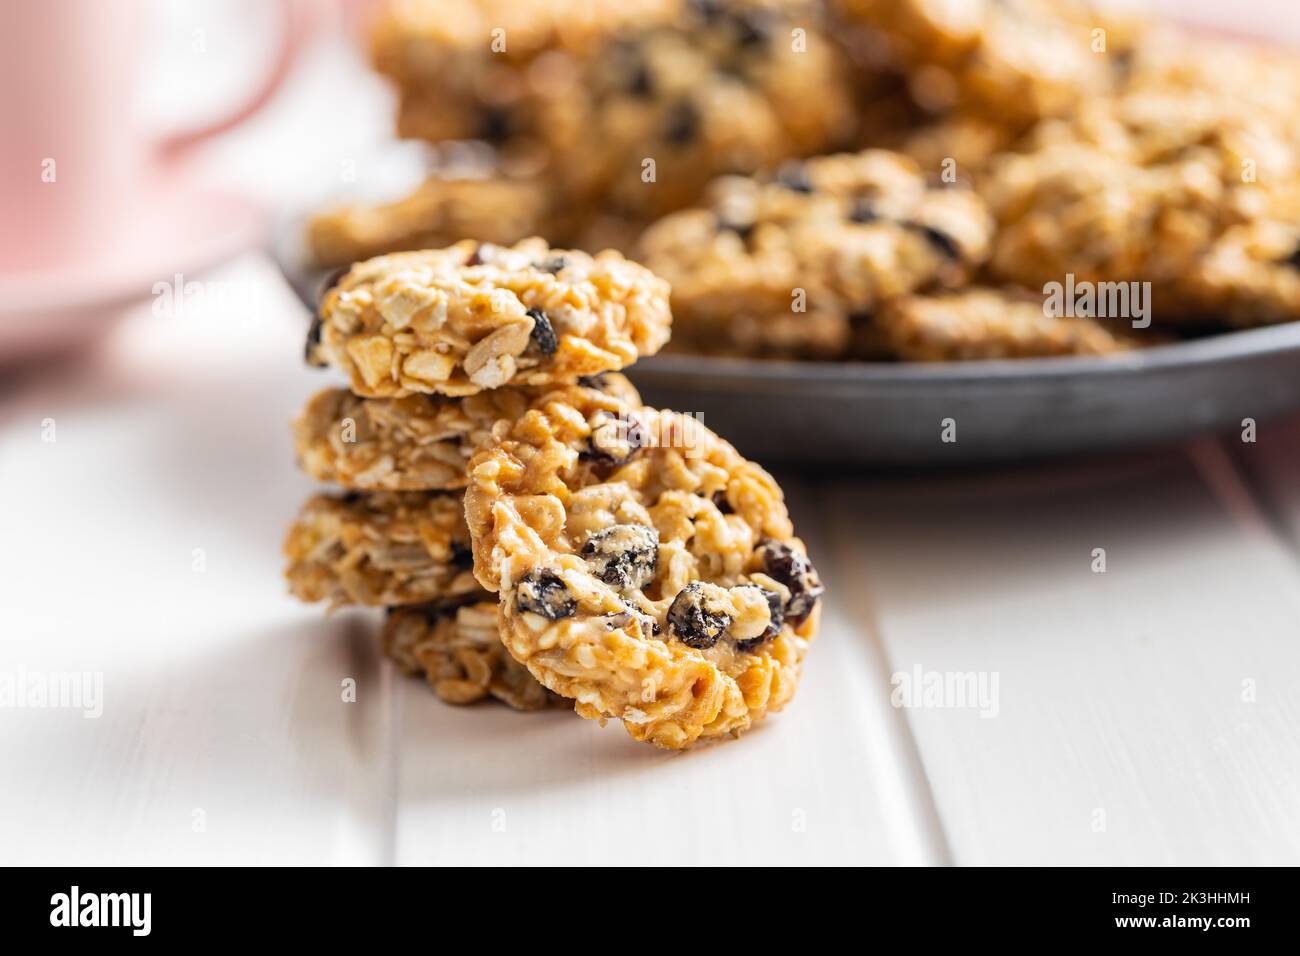 Wholegrain oat cookies. Cookies with oatmeal and raisins on the white table. Stock Photo